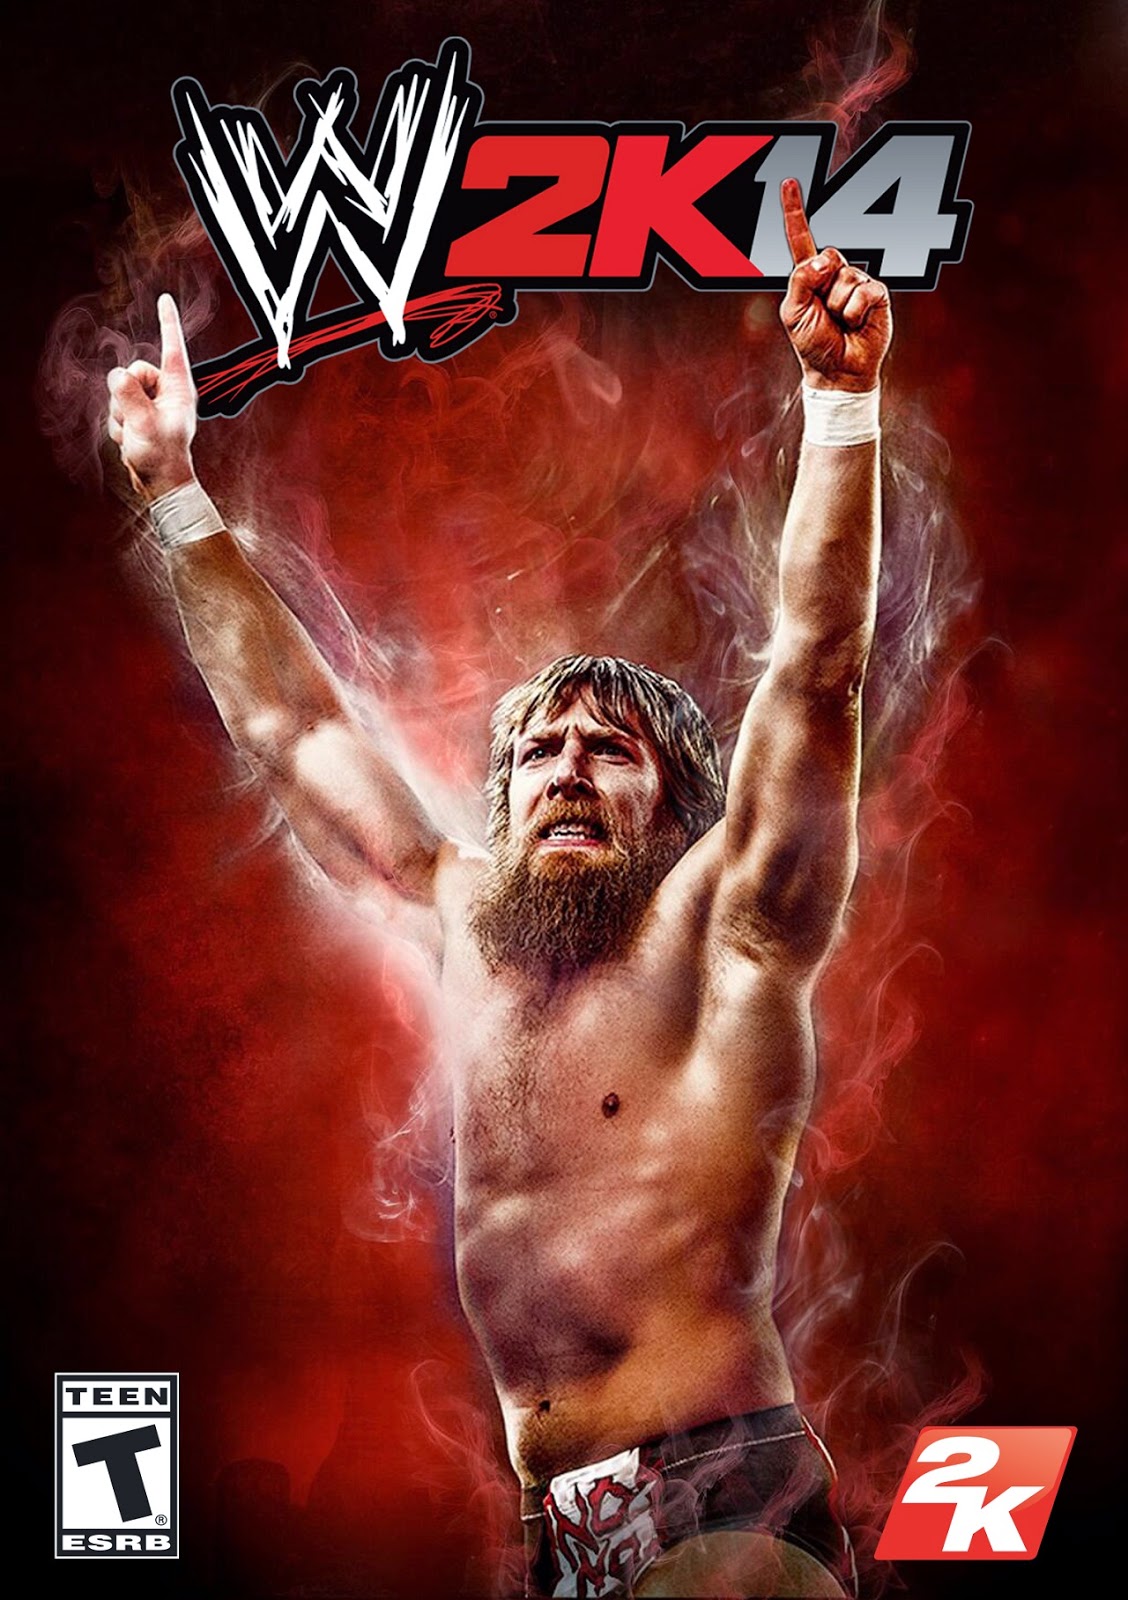 WWE 2k14 Free Download Full Game For PC